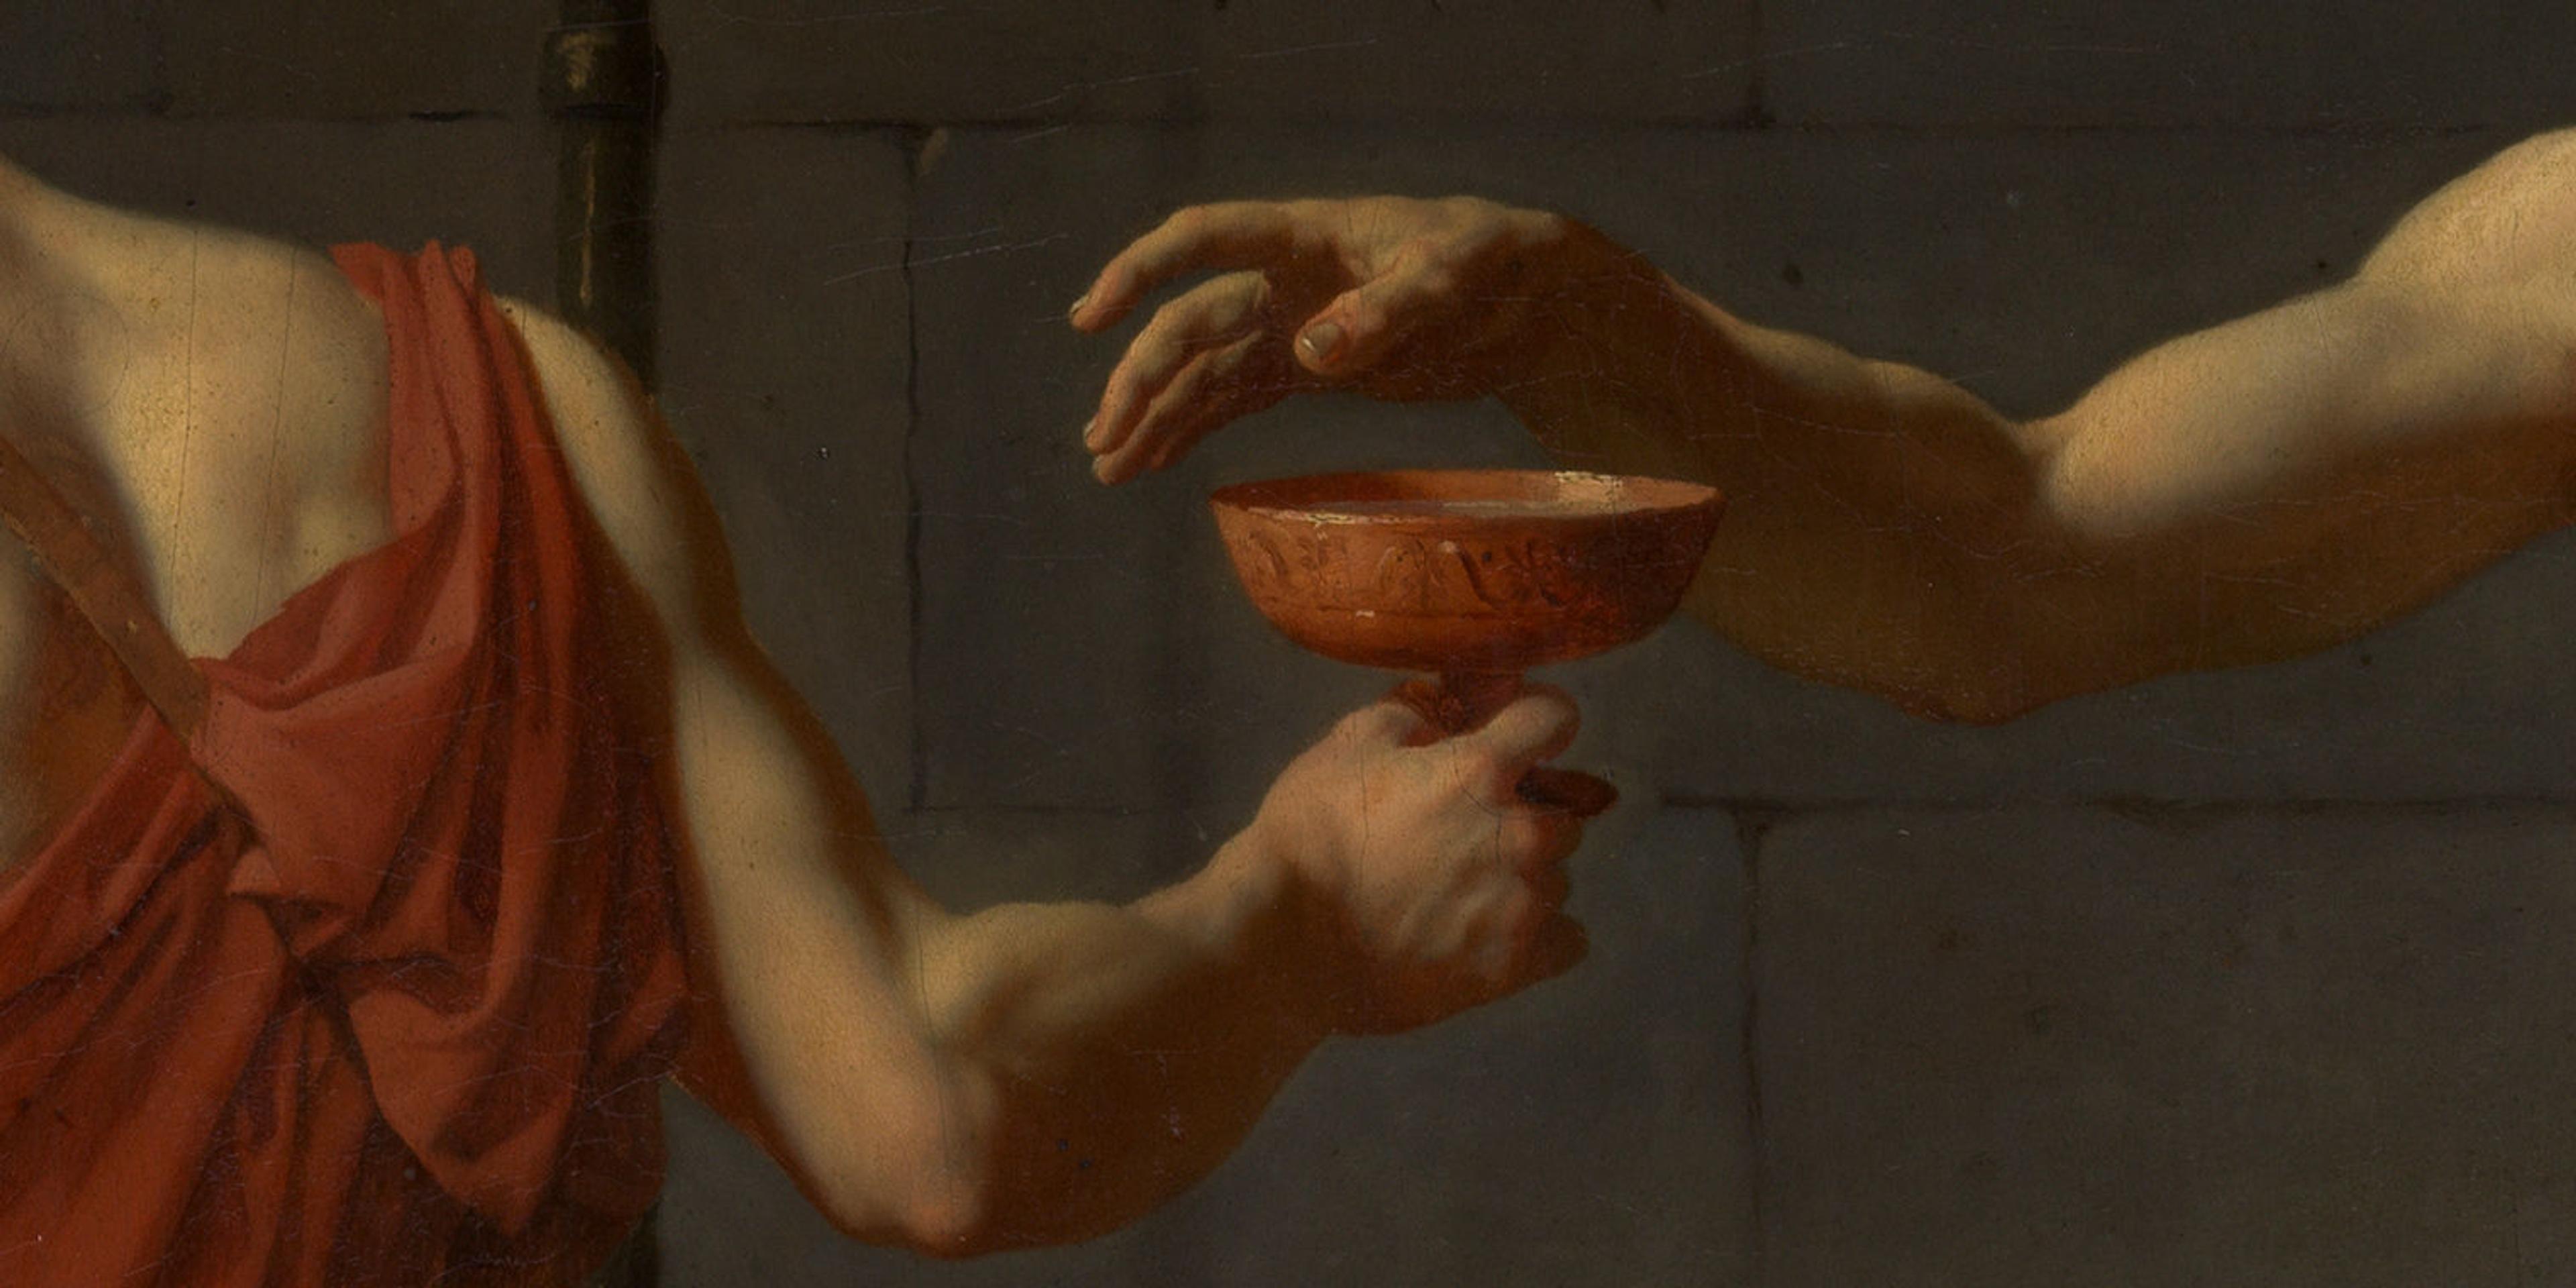 Detail of Jacques Louis David's "Death of Socrates" showing two male arms around a chalice